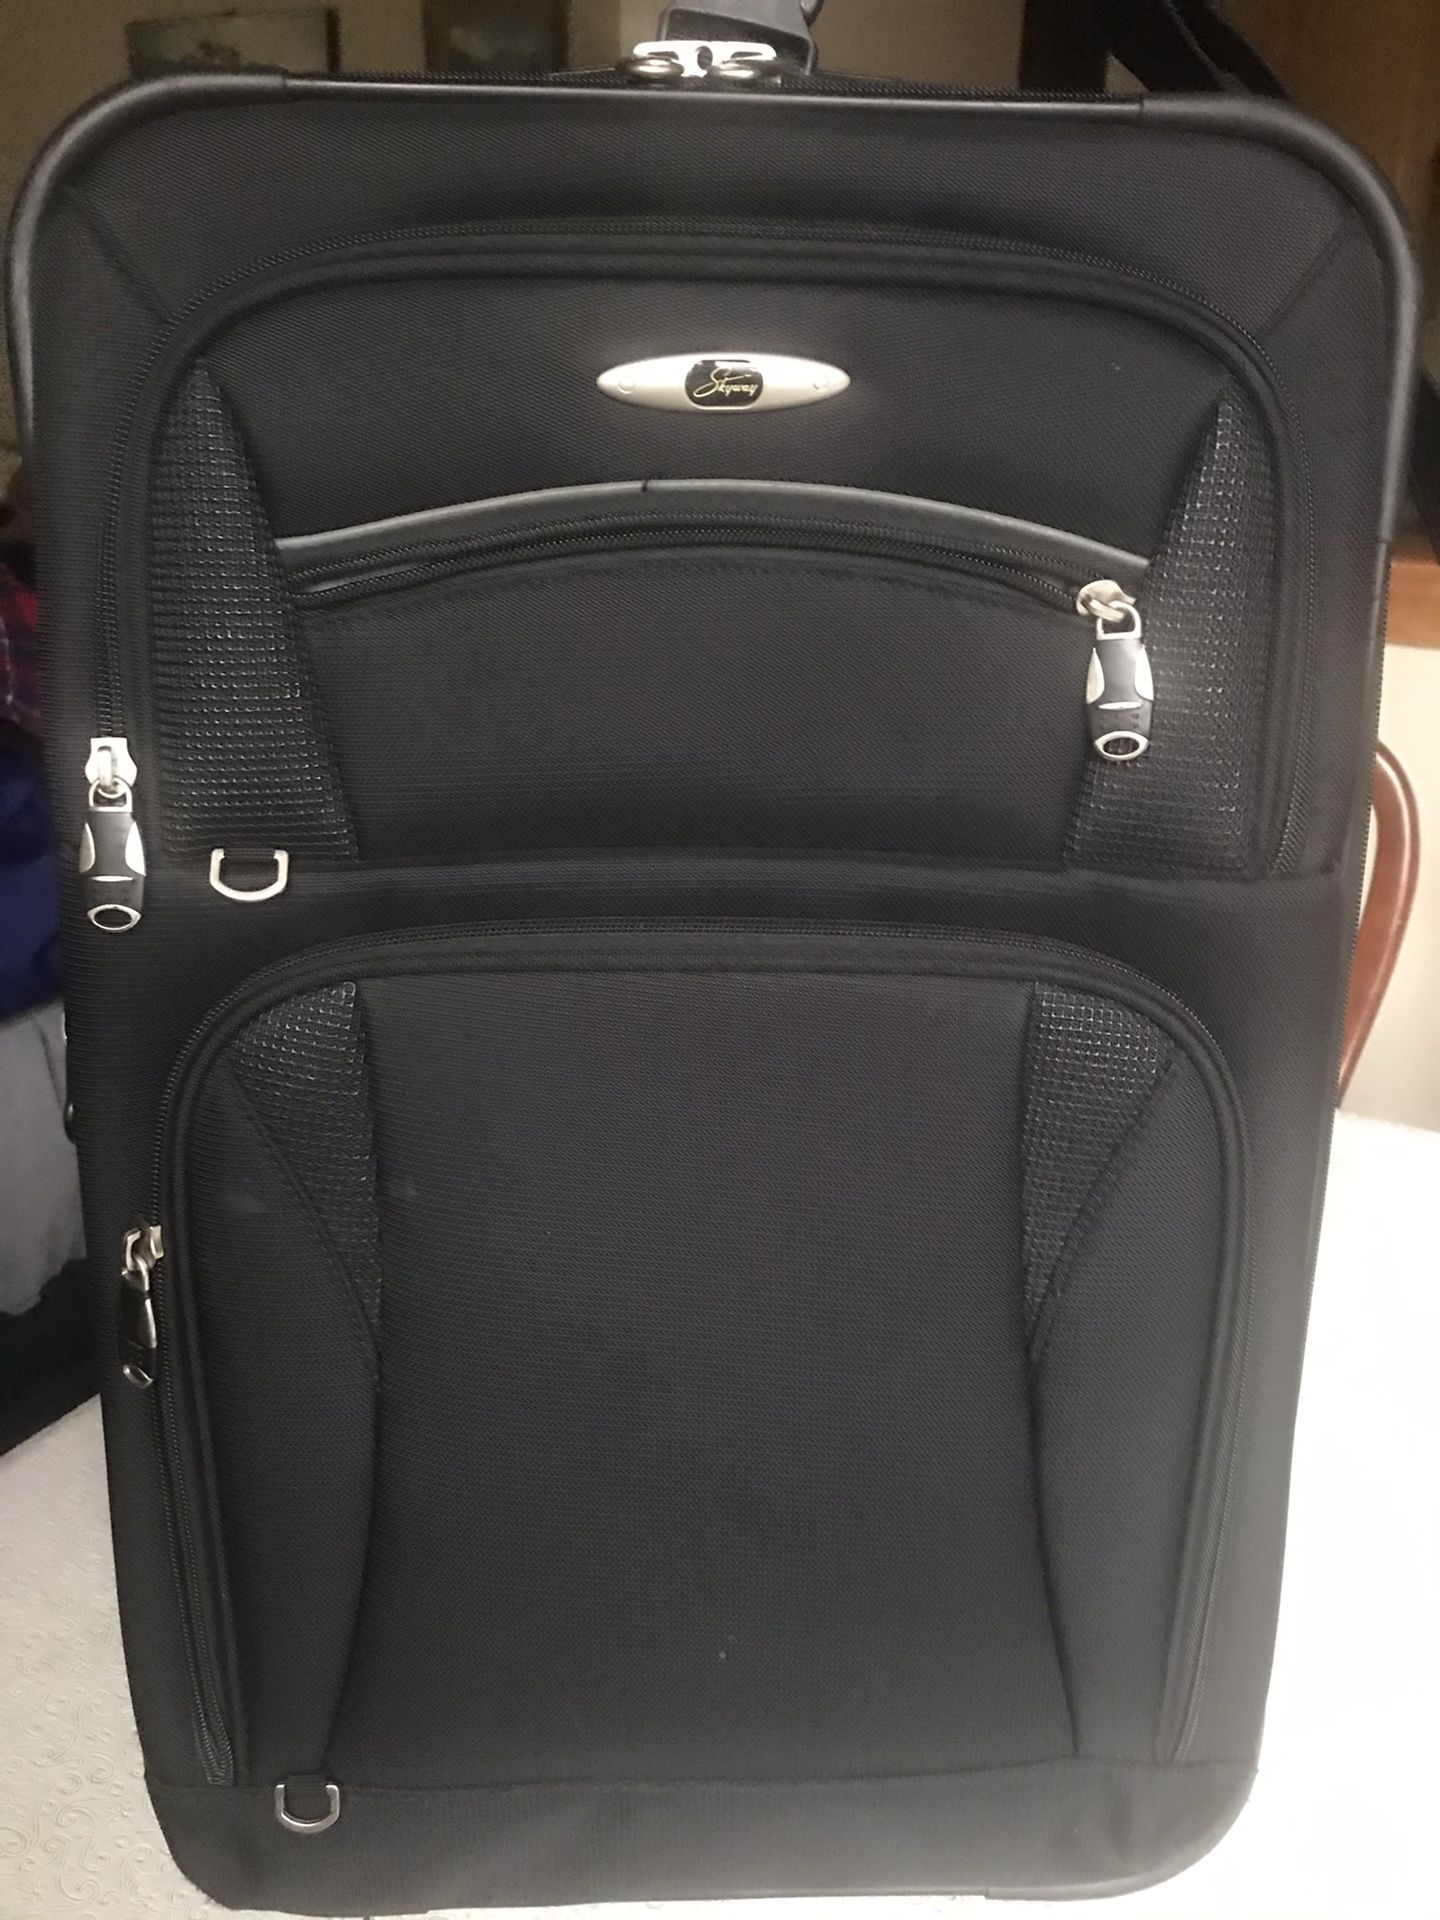 Black Suitcase! Brand new ~Very good condition!!